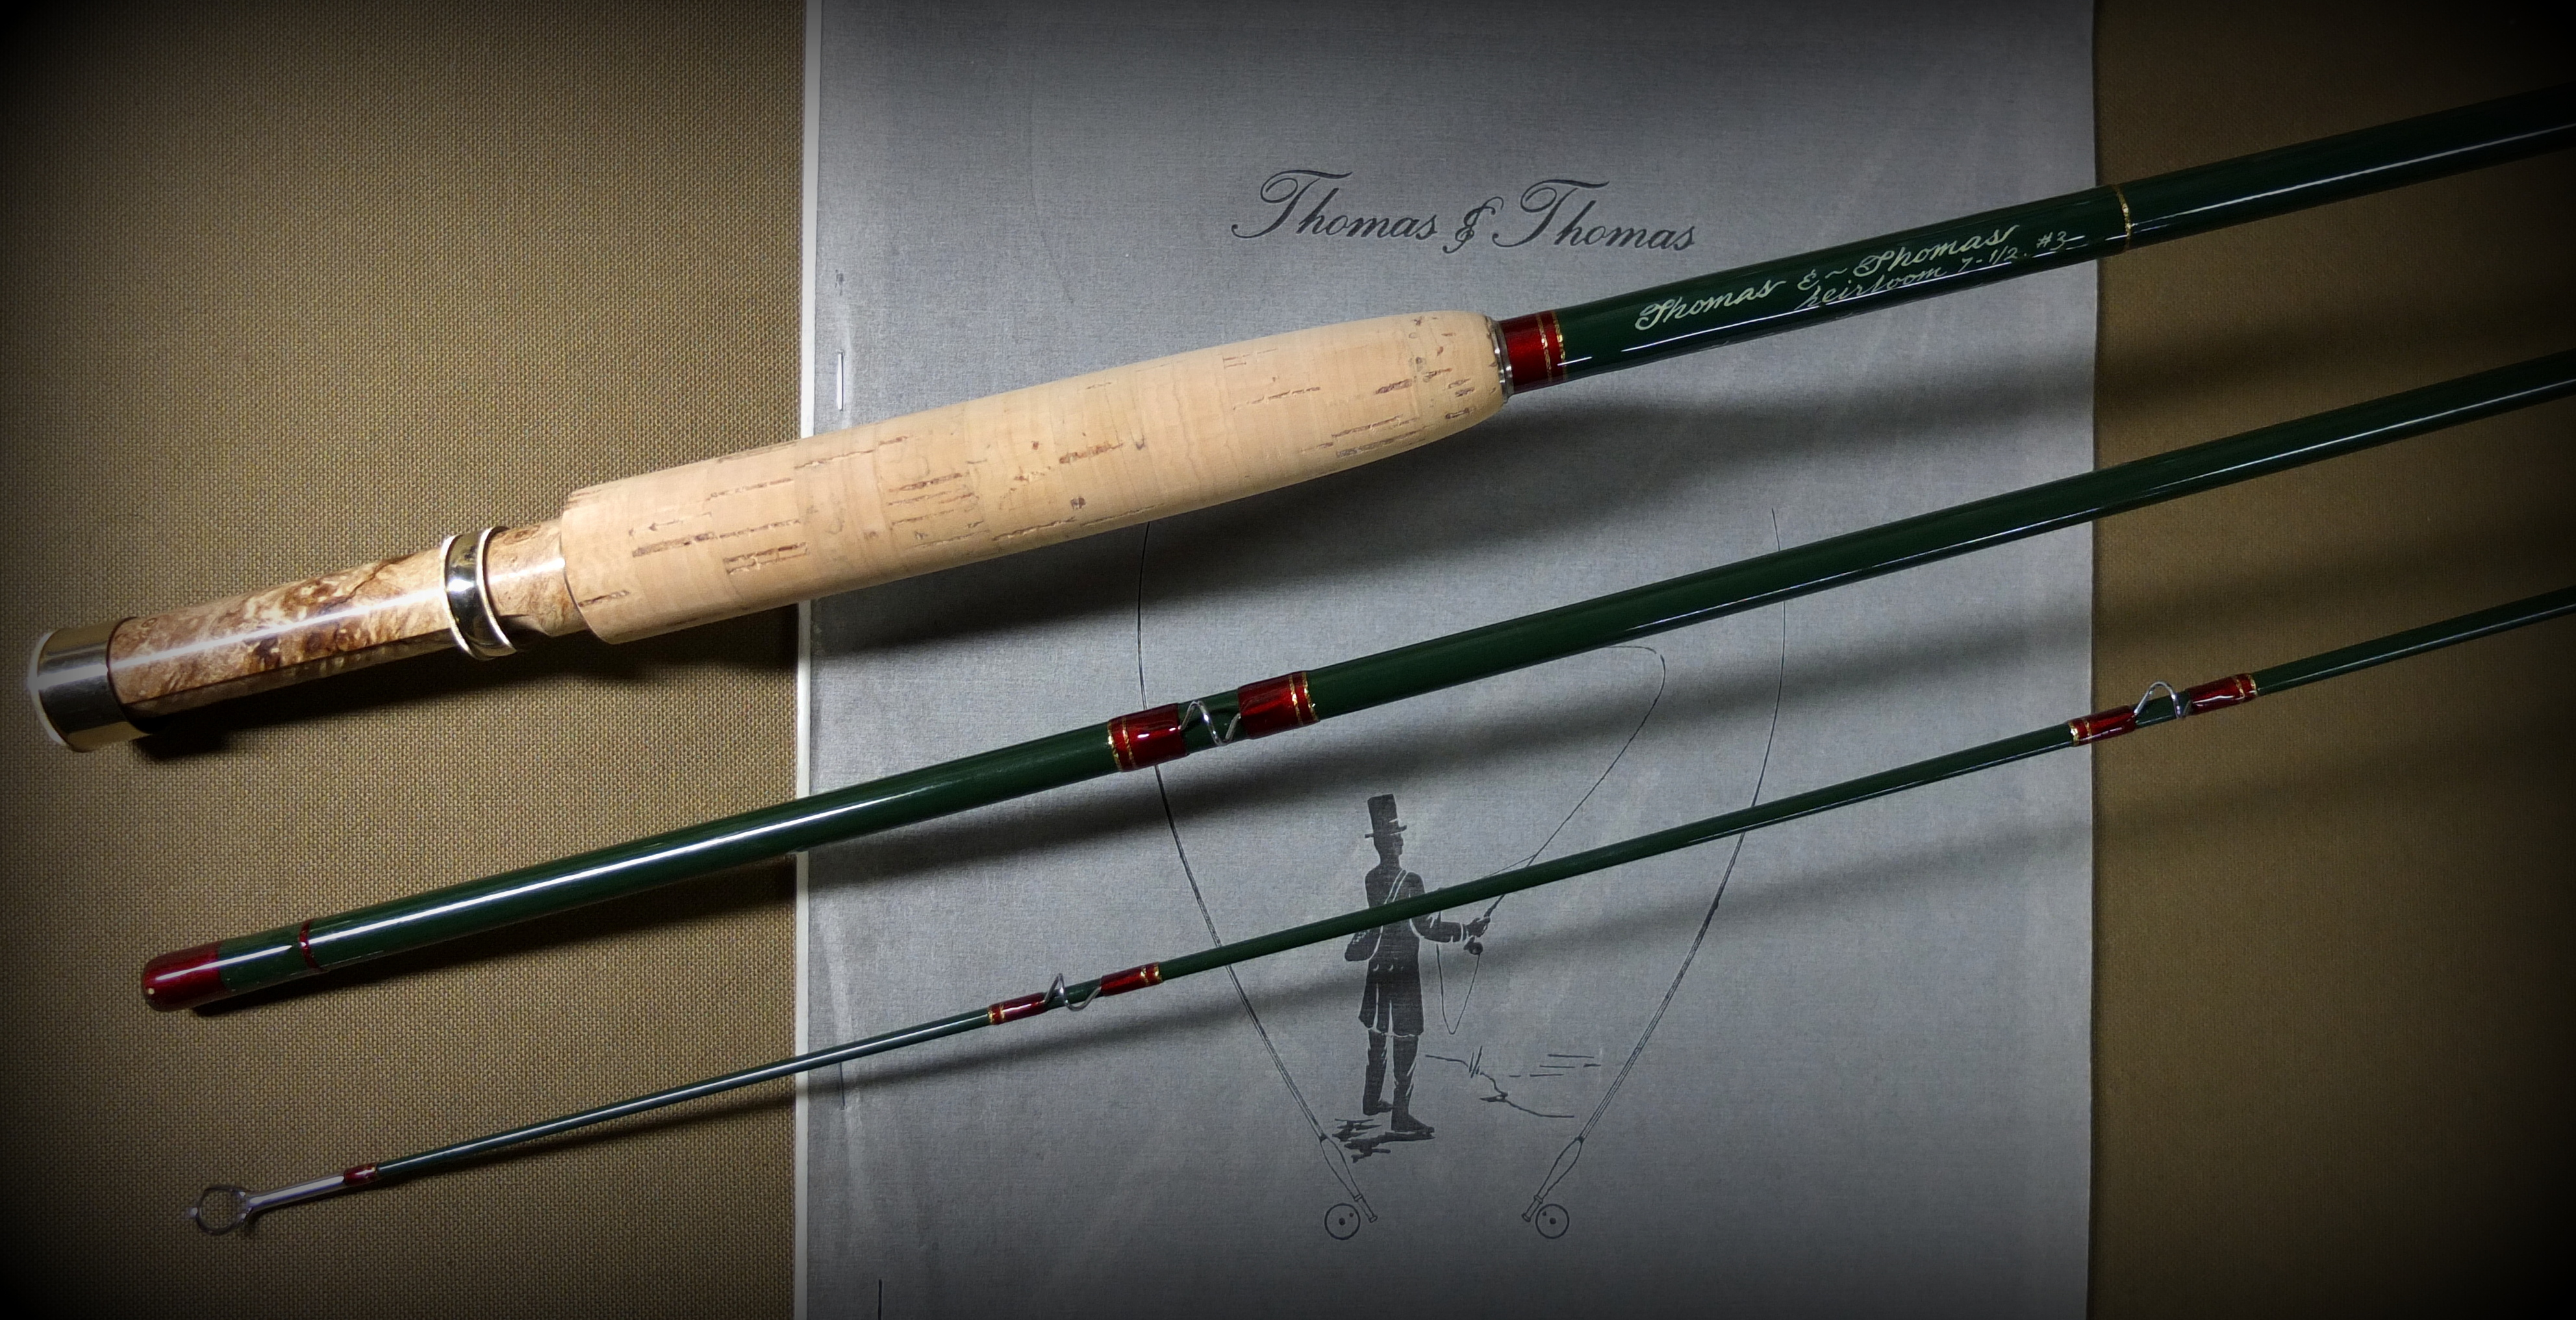 Thomas and Thomas inspired work from NCA - Iwate, Japan - new rod added 3/2, Rod Photos